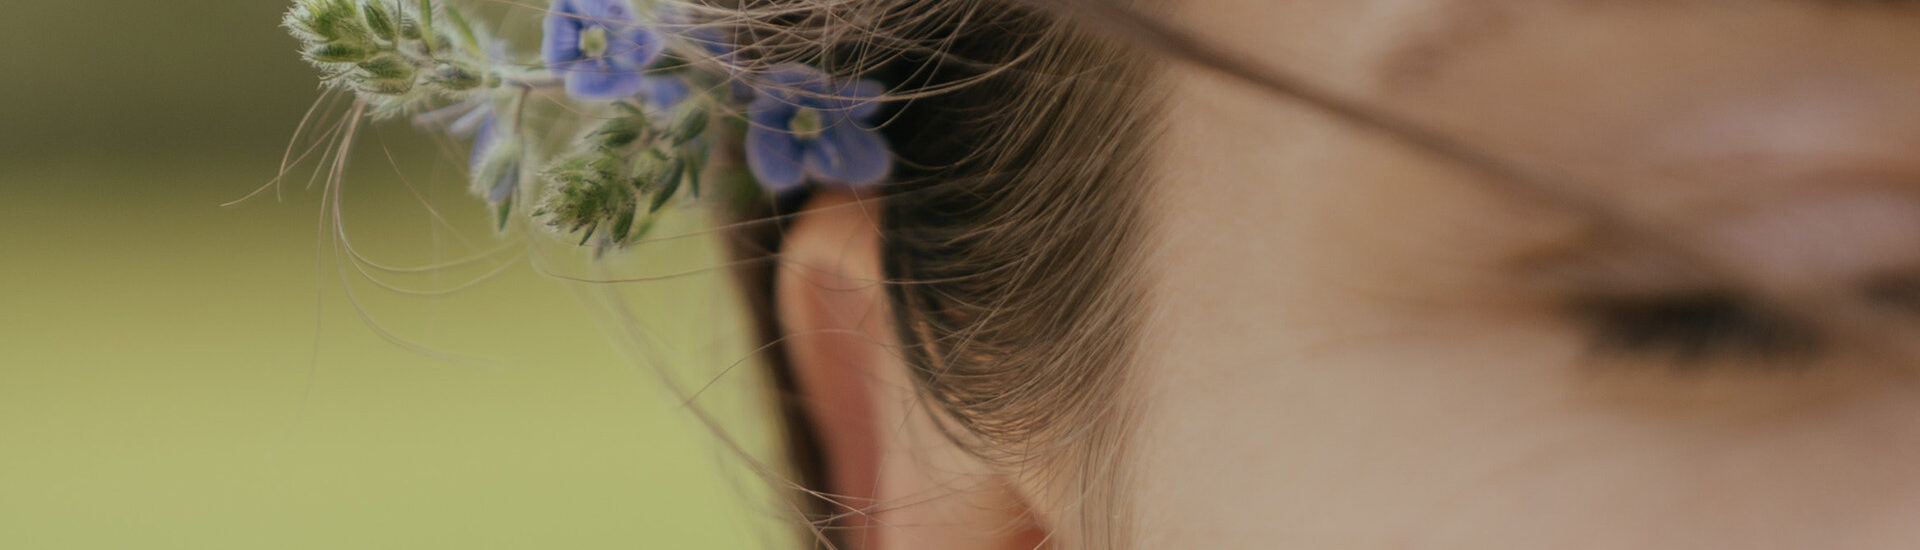 Closeup of a woman with lavender behind her ear